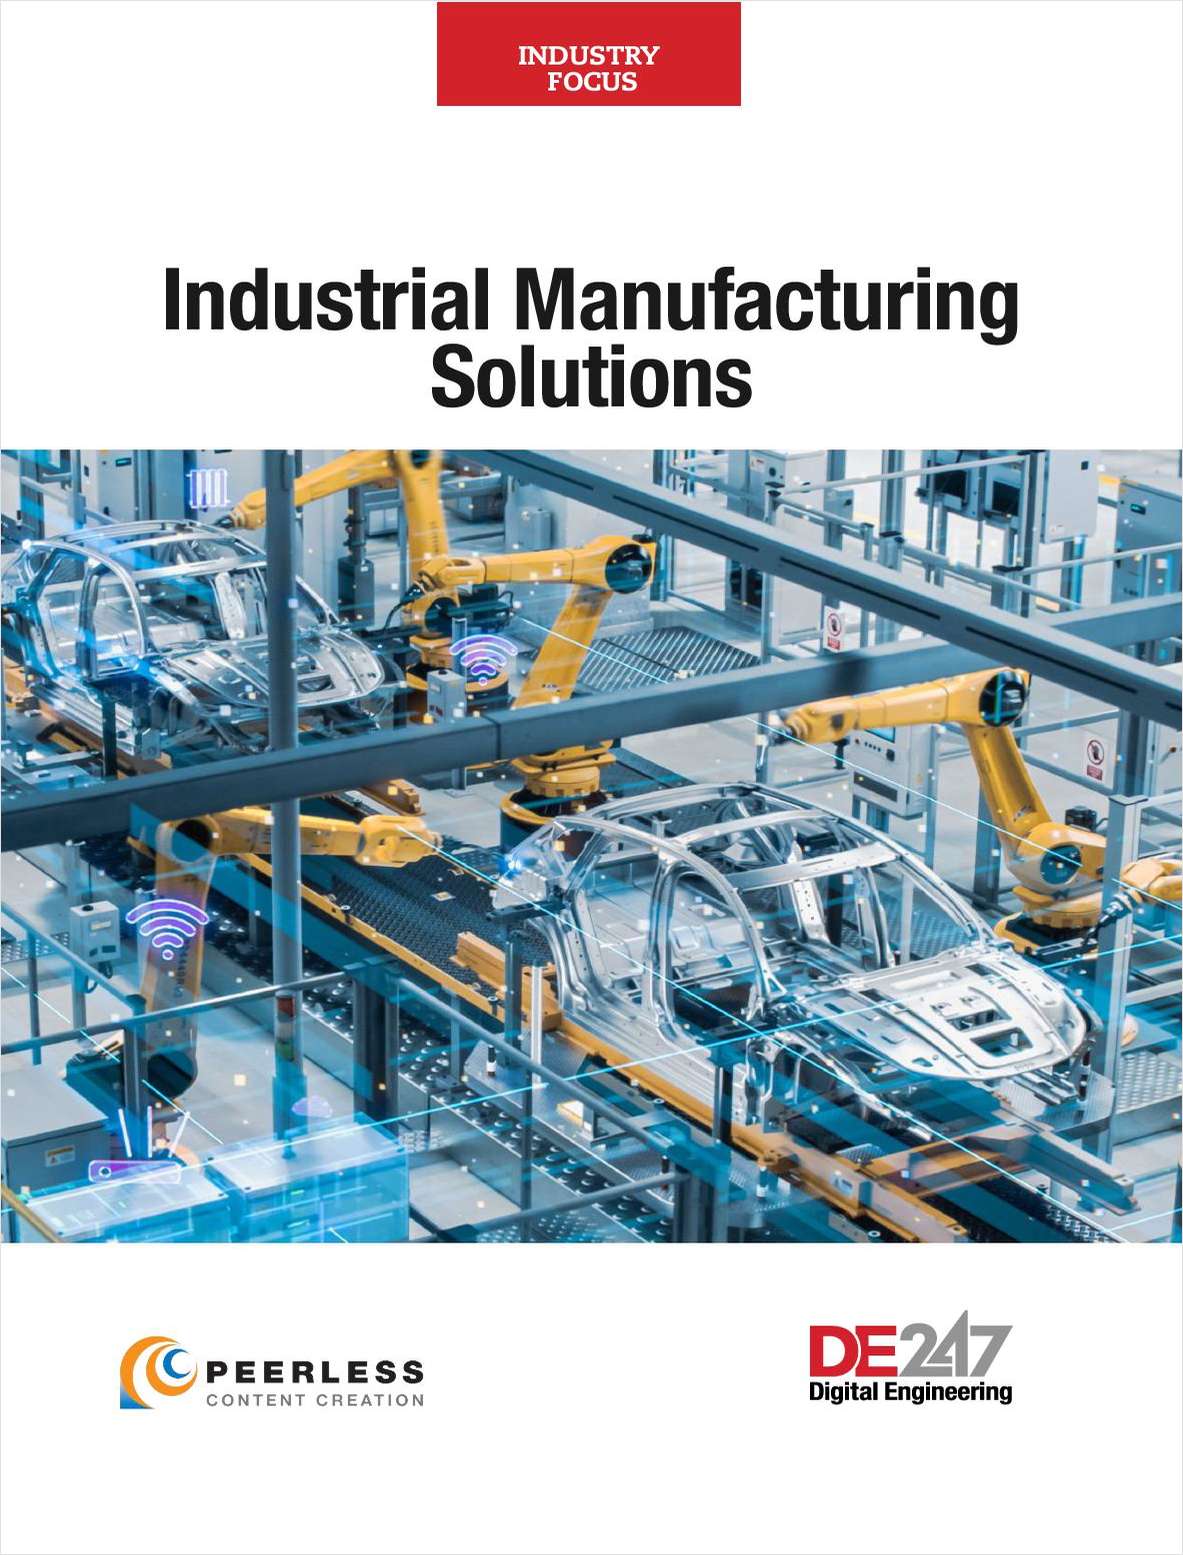 Industrial Manufacturing Solutions